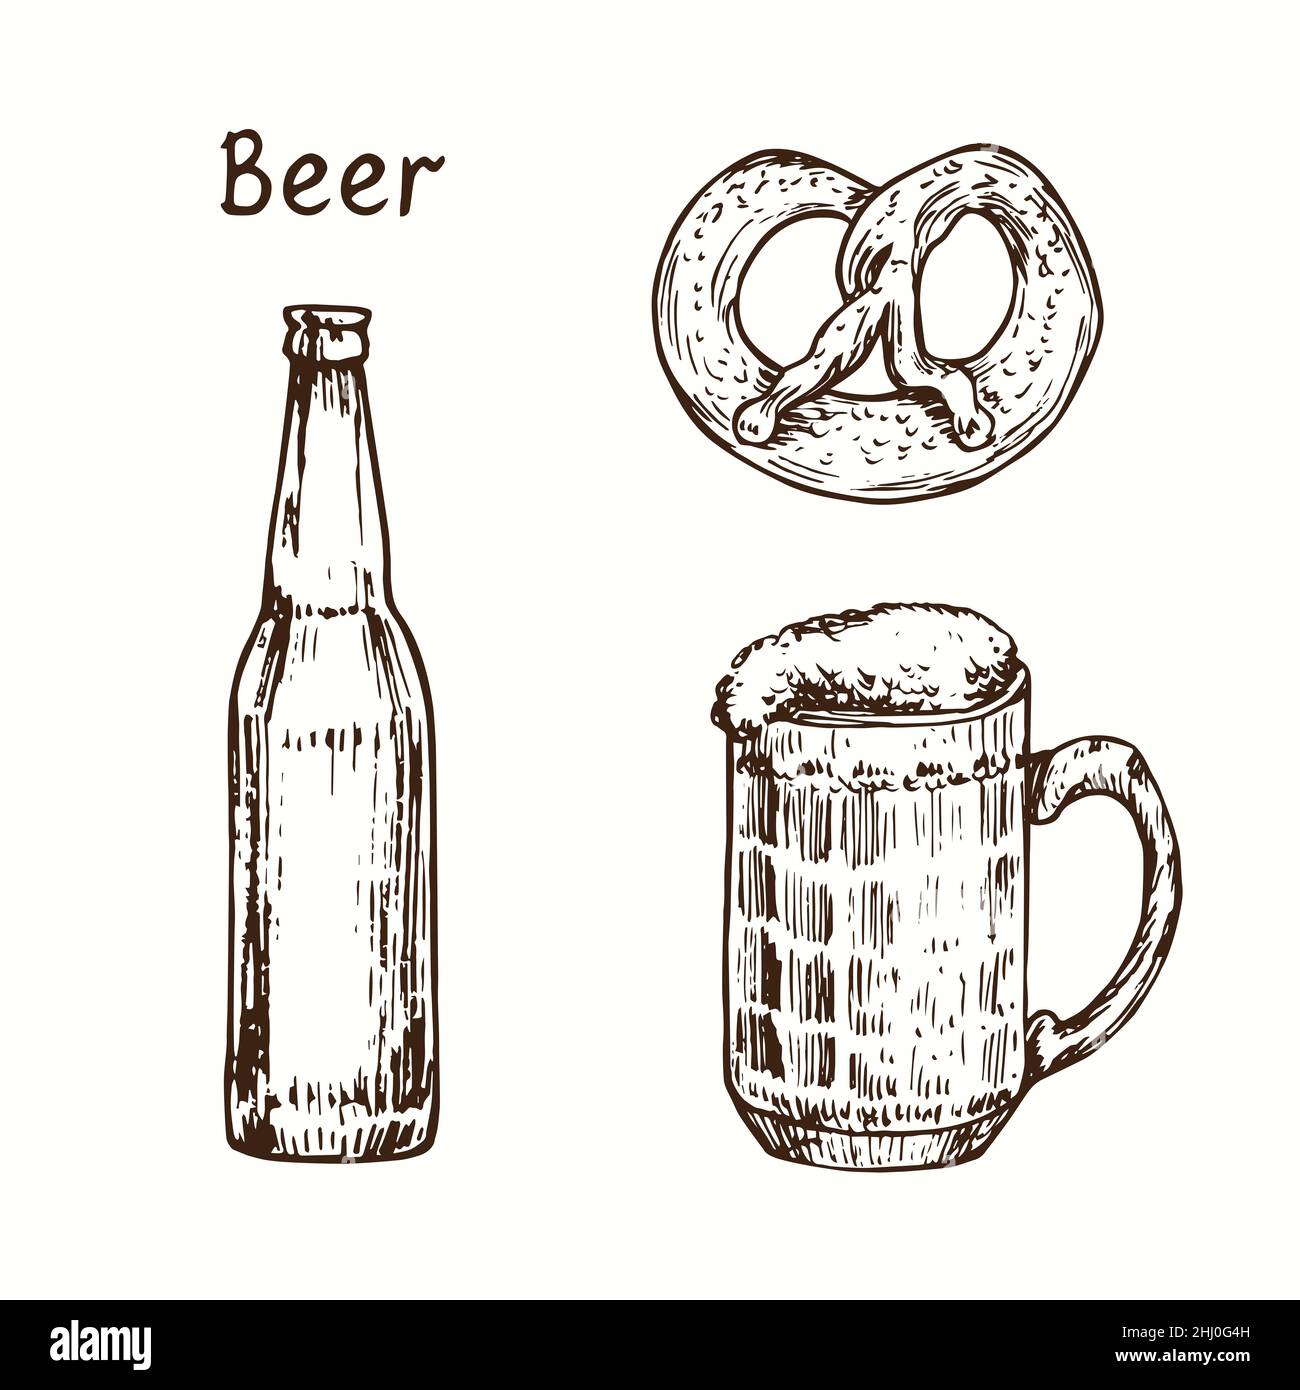 Beer bottle, mug and pretzel. Ink black and white doodle drawing in woodcut style. Stock Photo